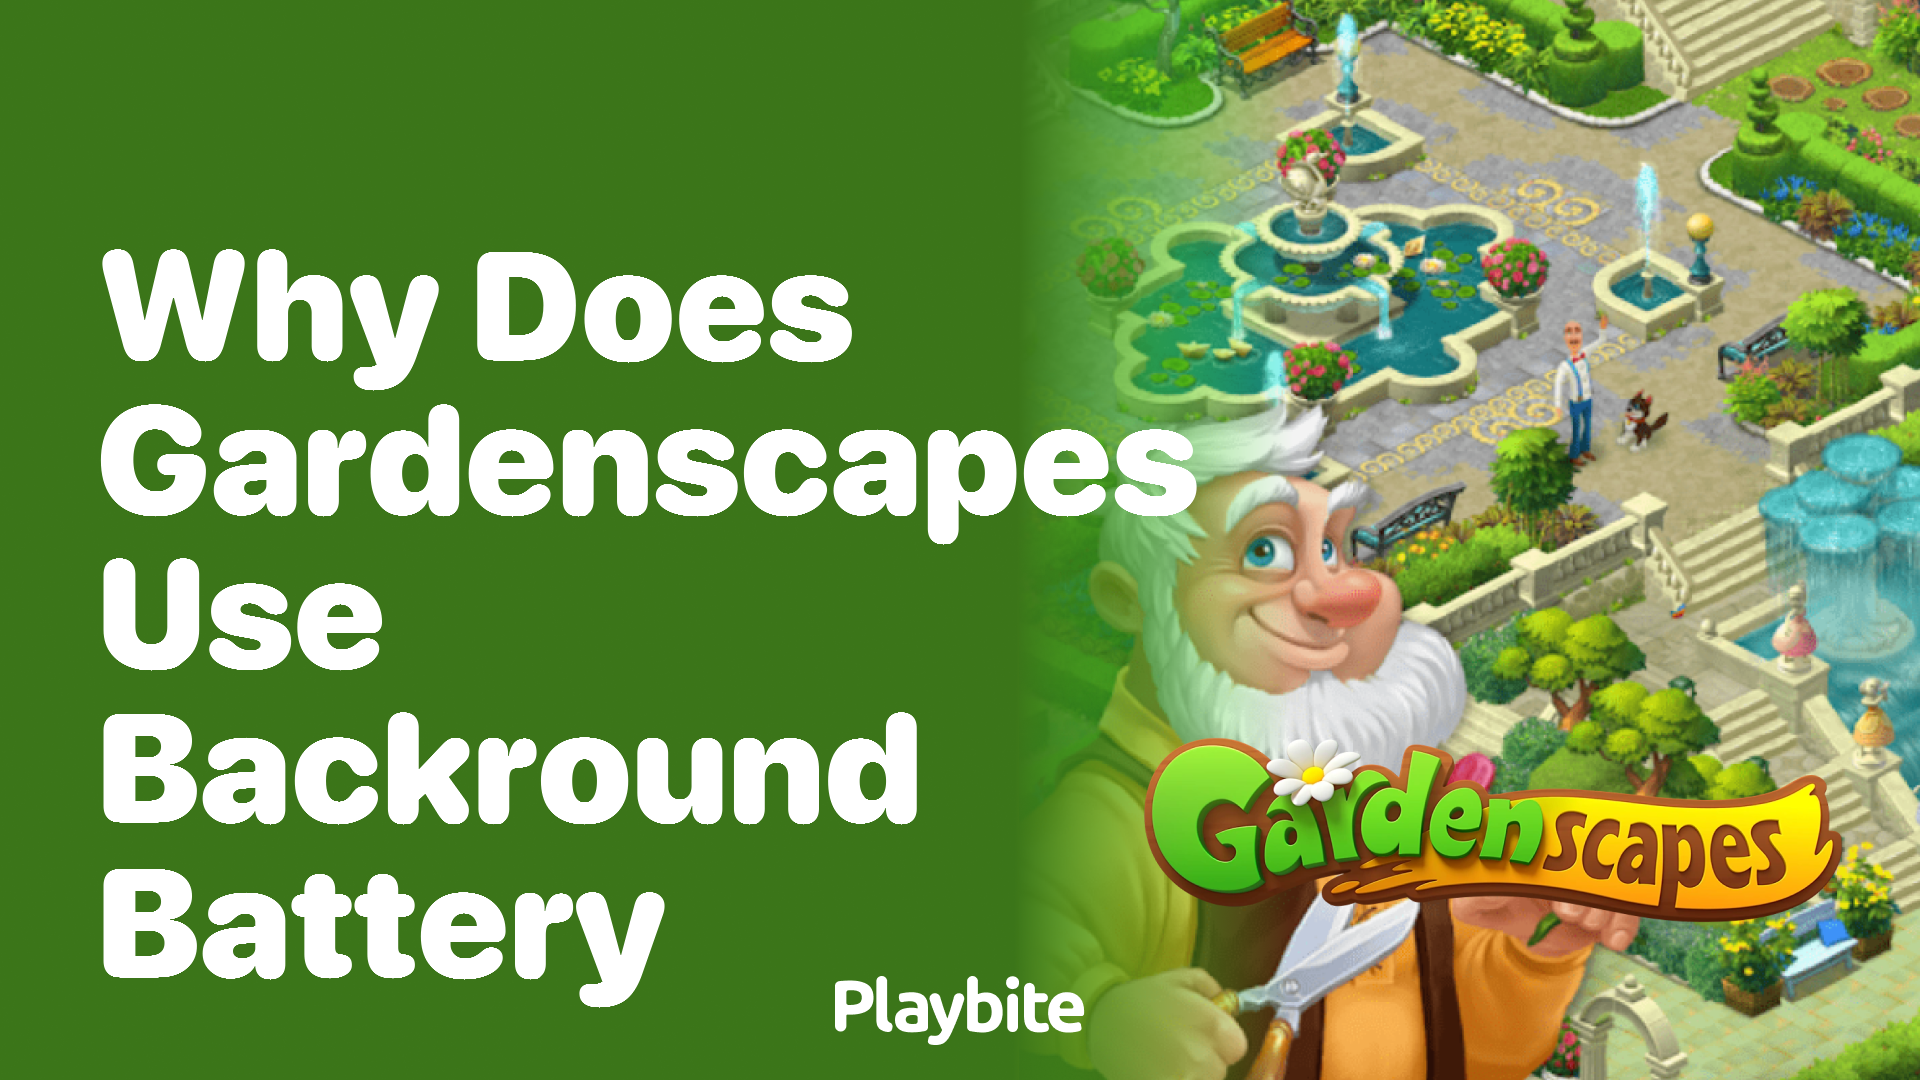 Why Does Gardenscapes Use Background Battery?